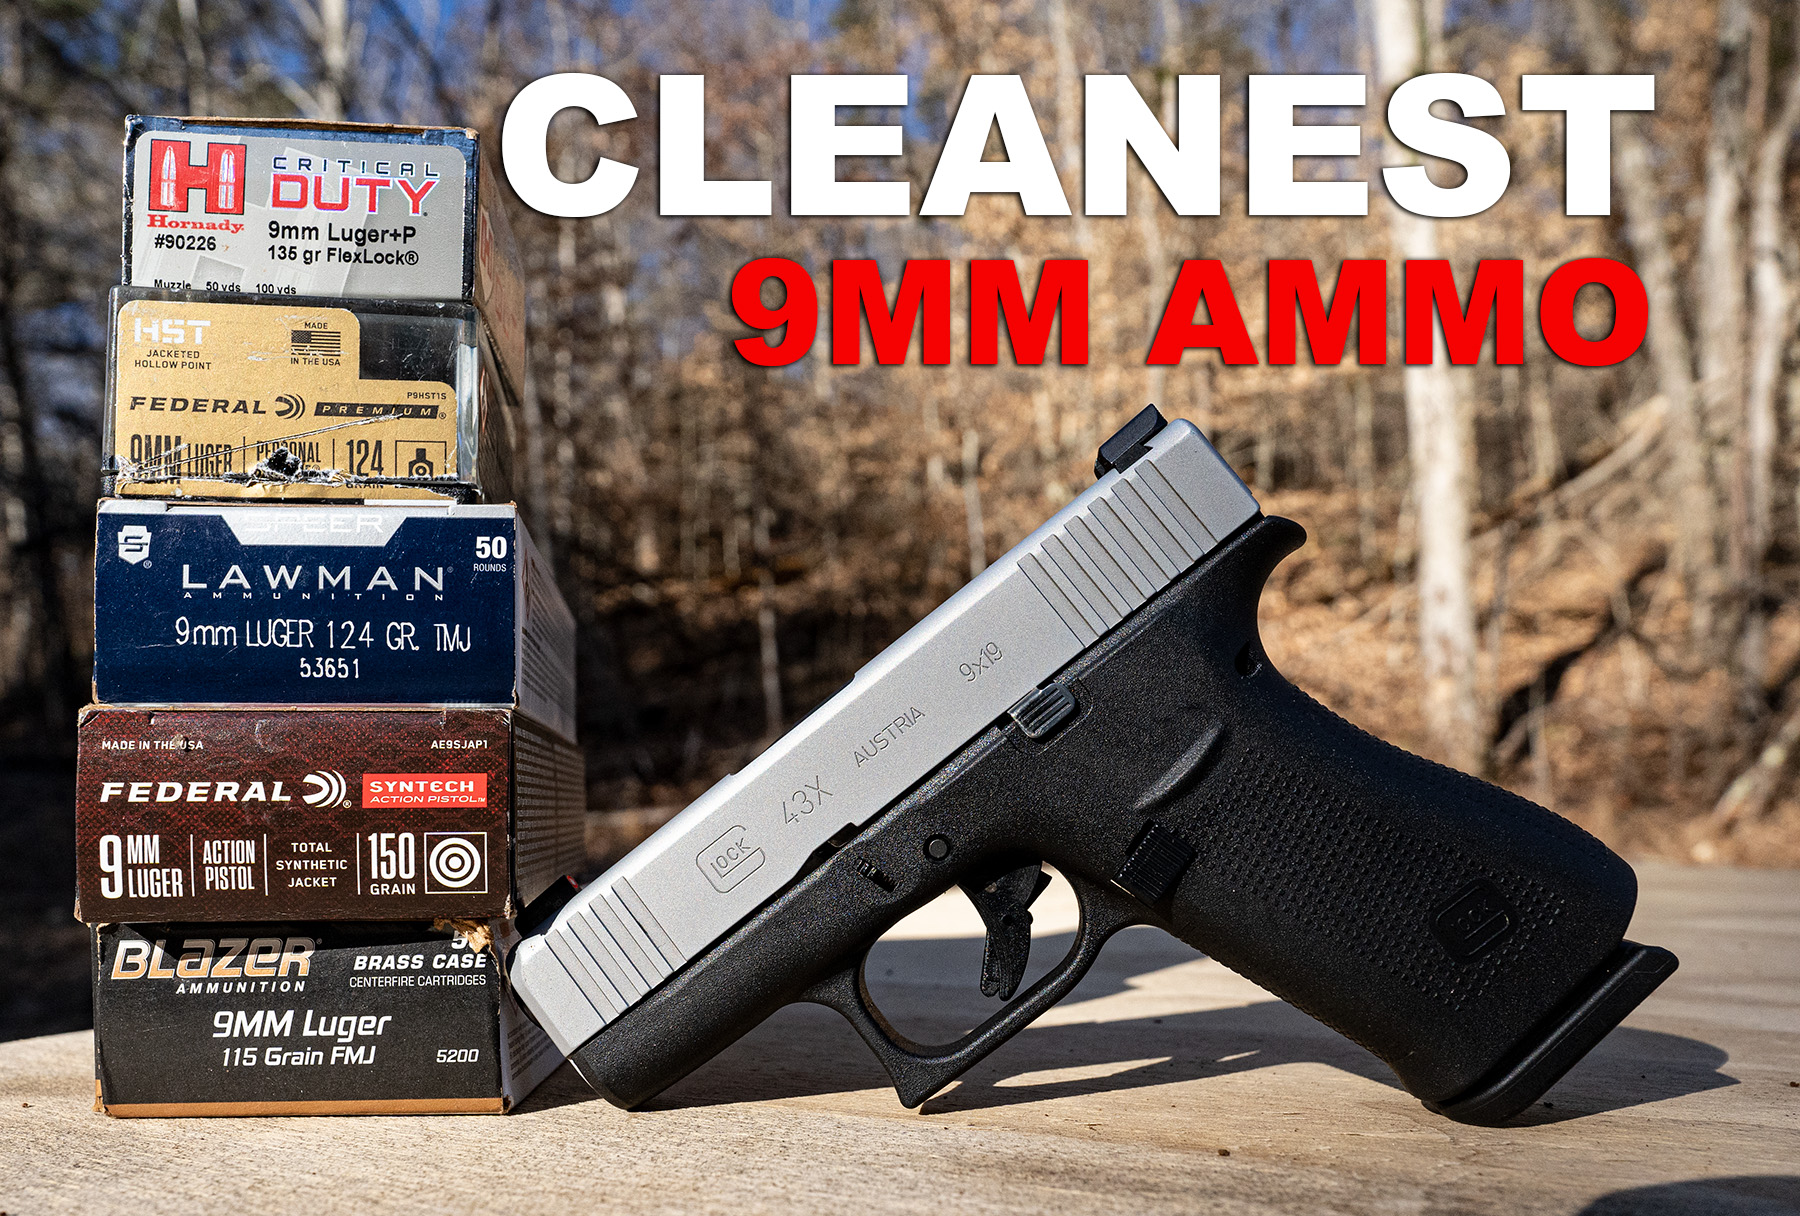 Cleanest 9mm ammo